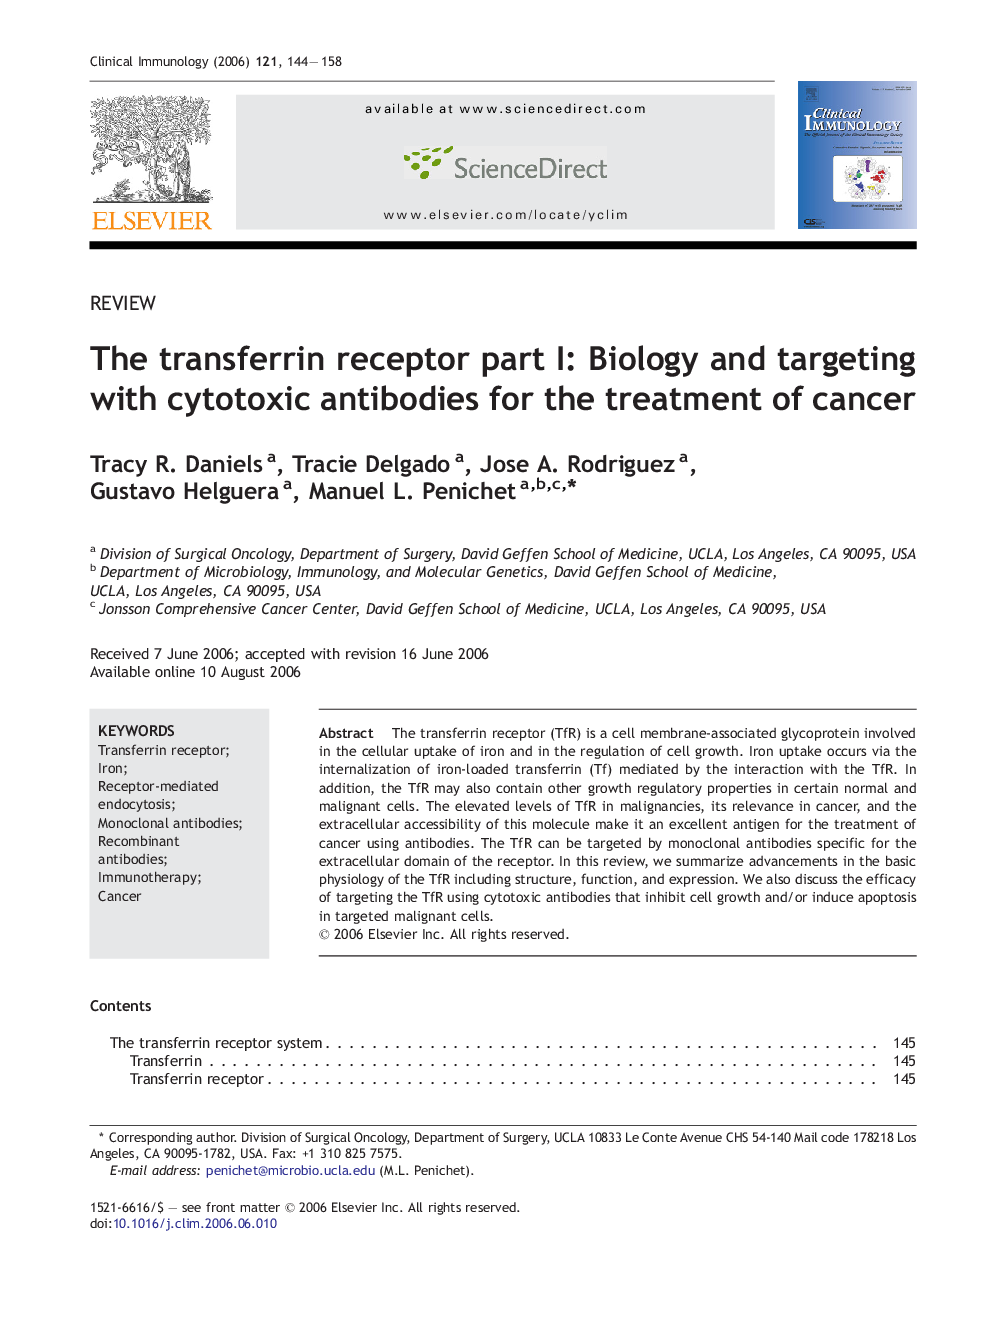 The transferrin receptor part I: Biology and targeting with cytotoxic antibodies for the treatment of cancer